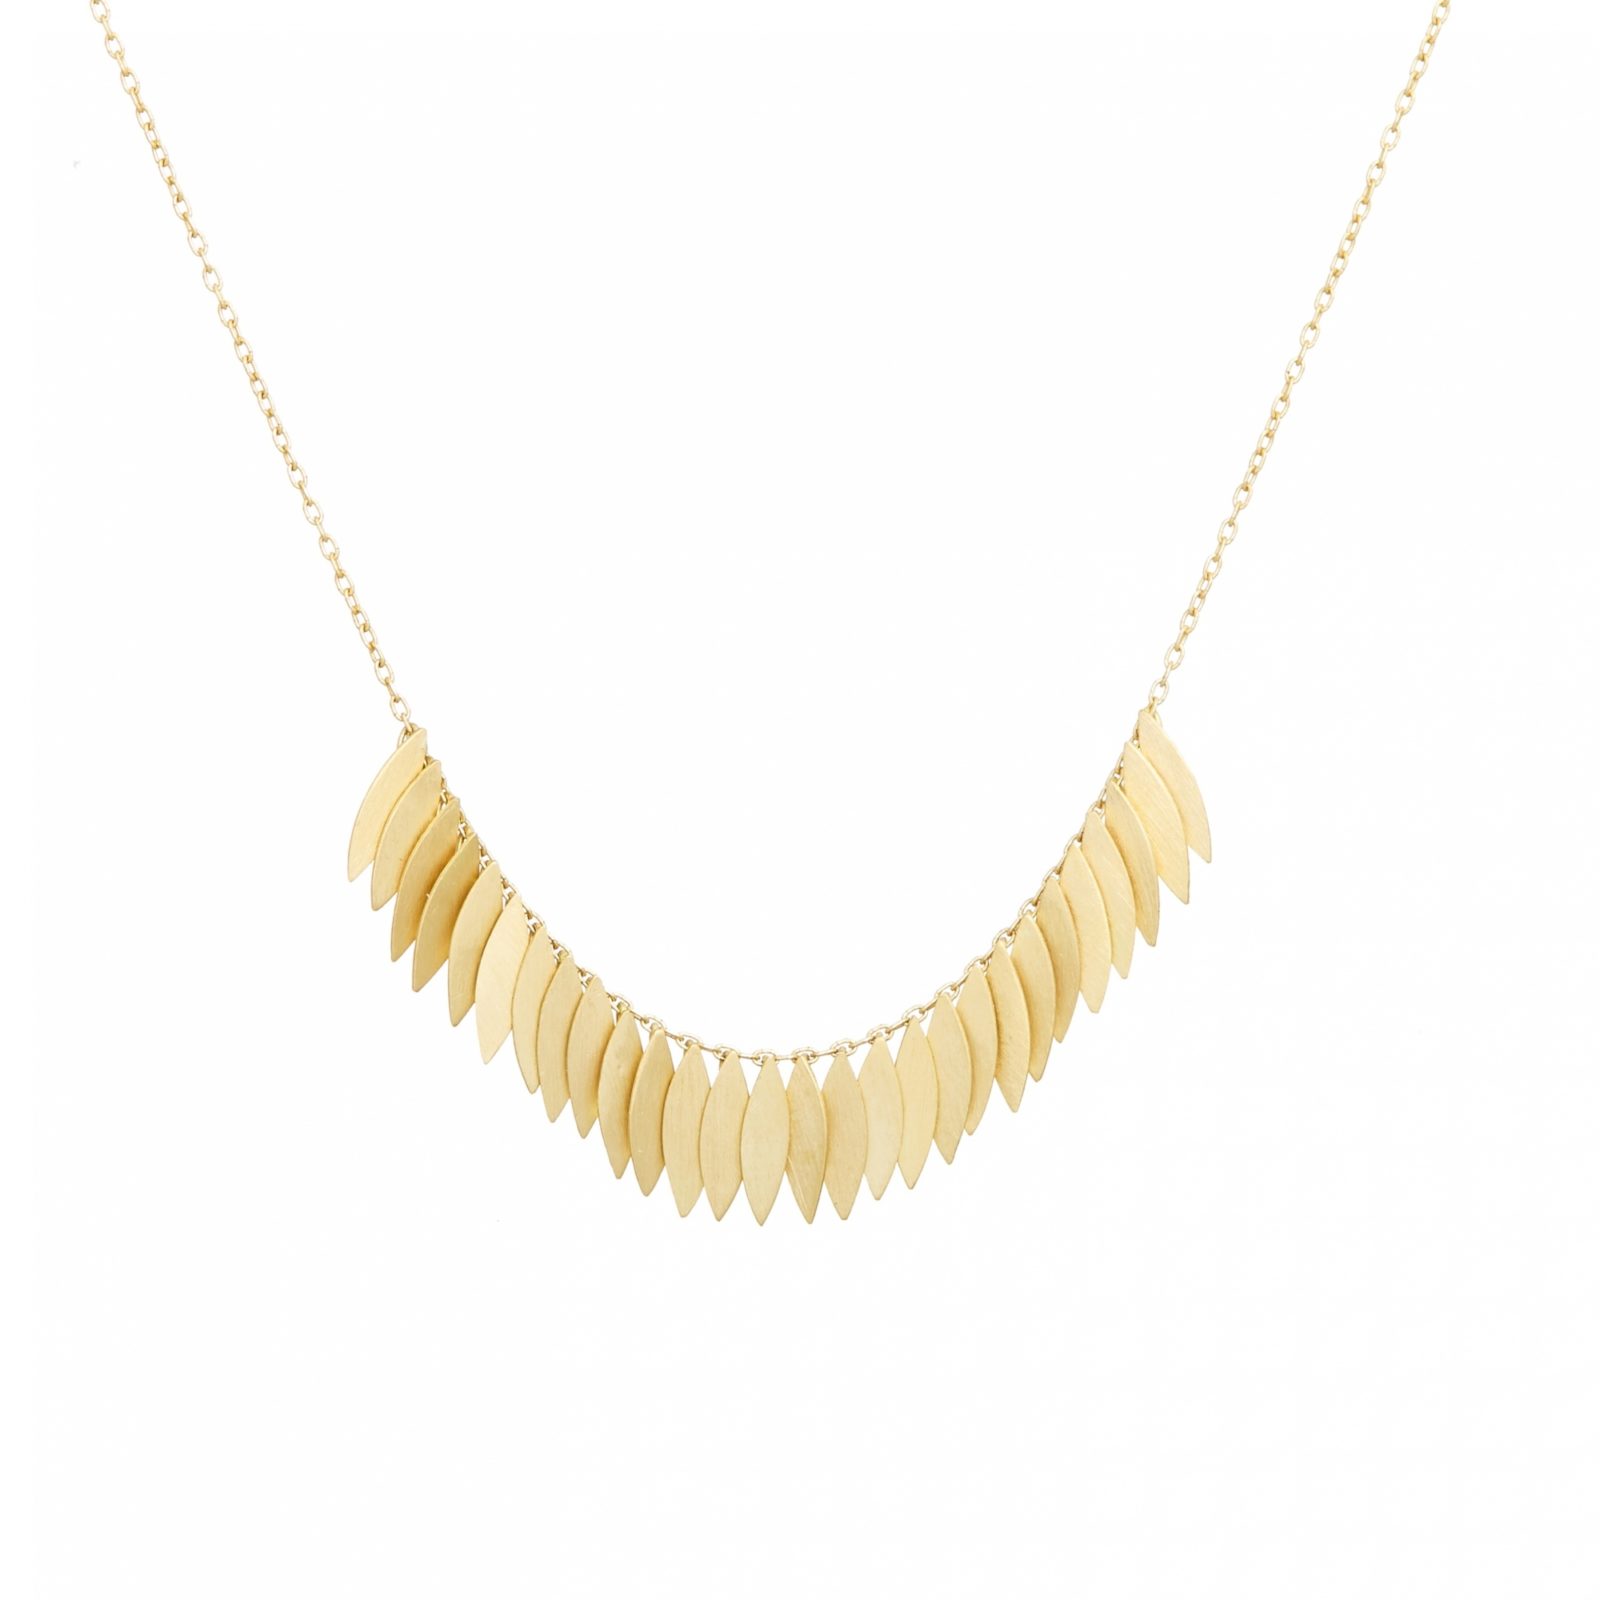 Sia Taylor KN21 Y Yellow Gold Golden Leaf Arc Necklace WB